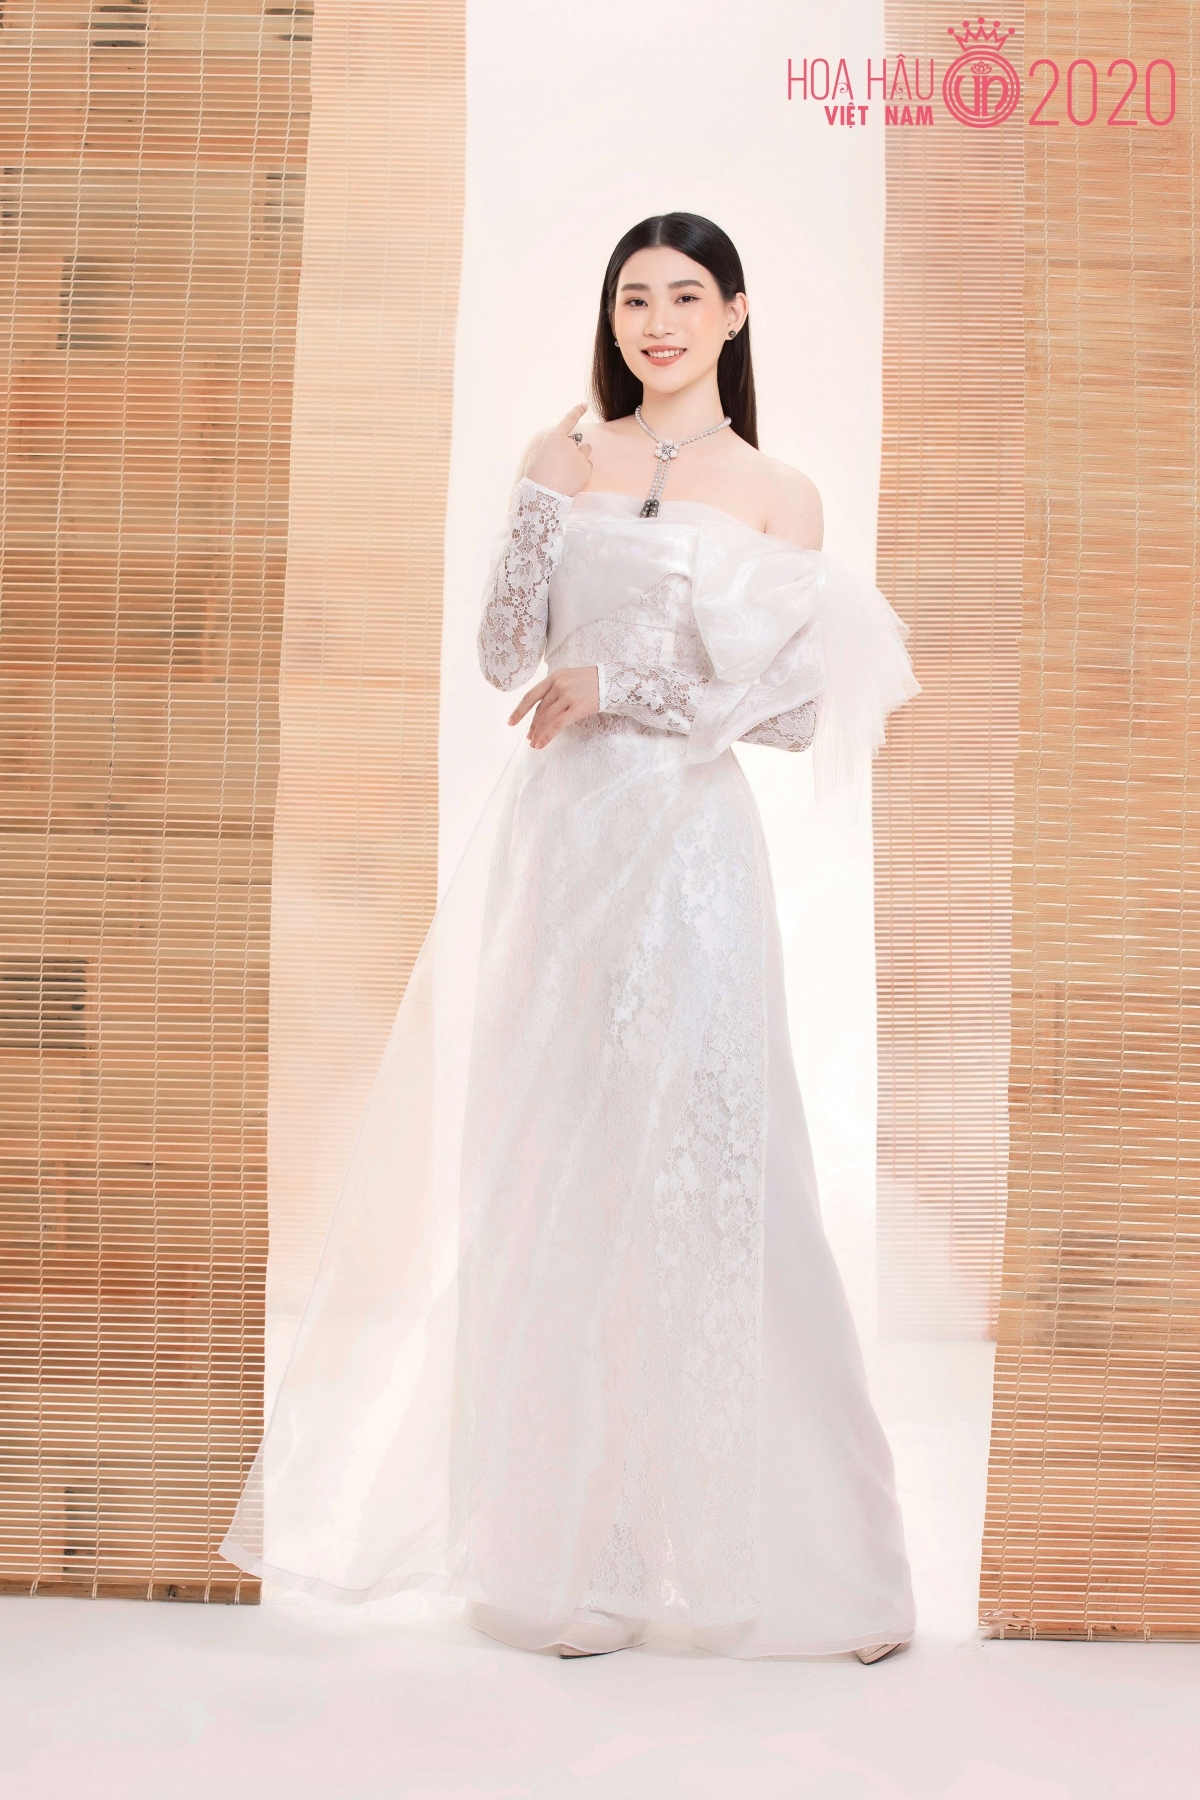 leading miss vietnam contestants shine in ao dai photo shoot picture 13